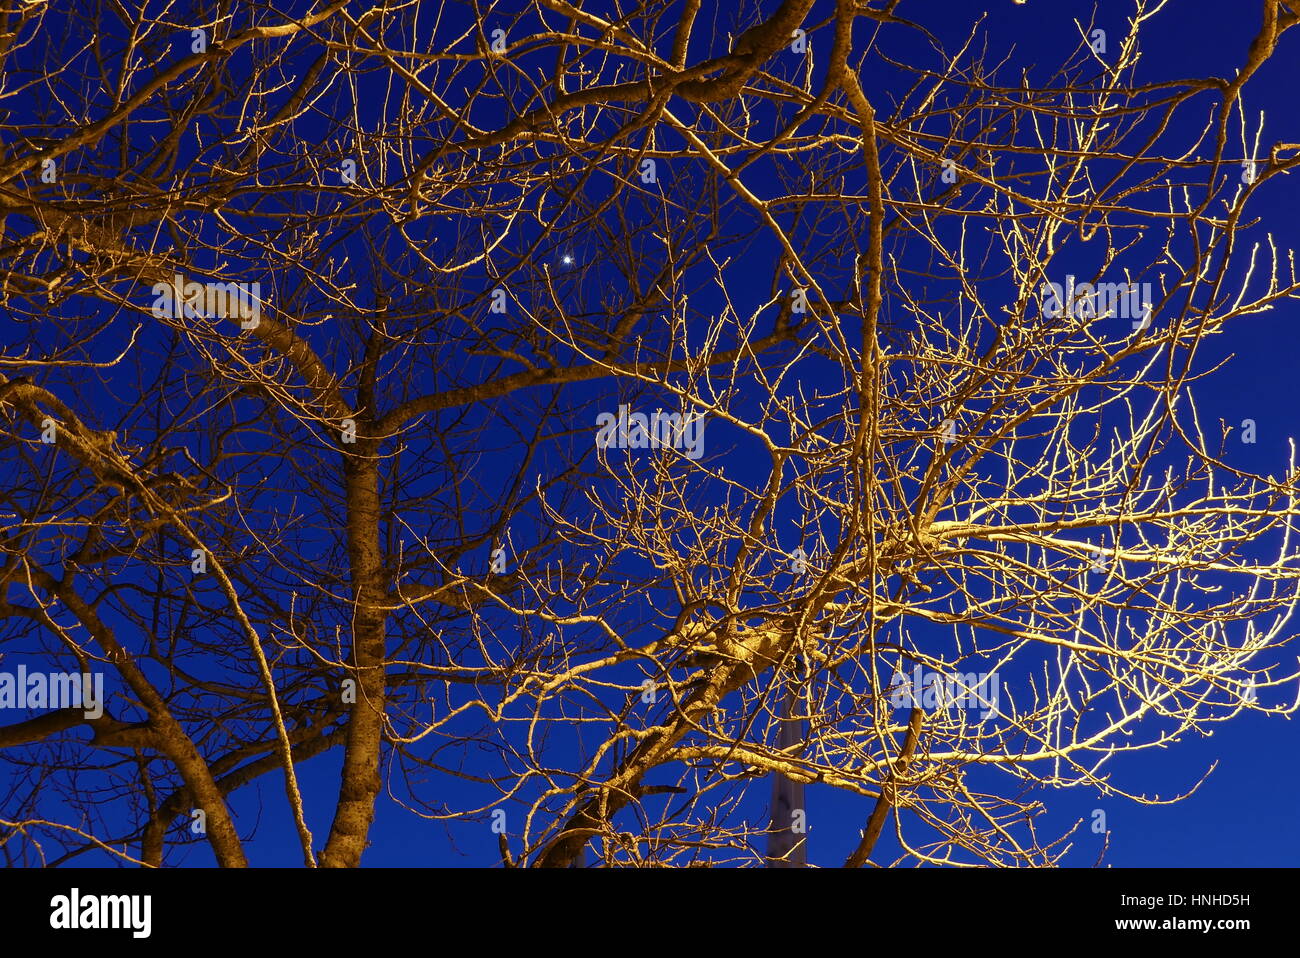 Illuminated branches of trees at night on blue sky background Stock Photo